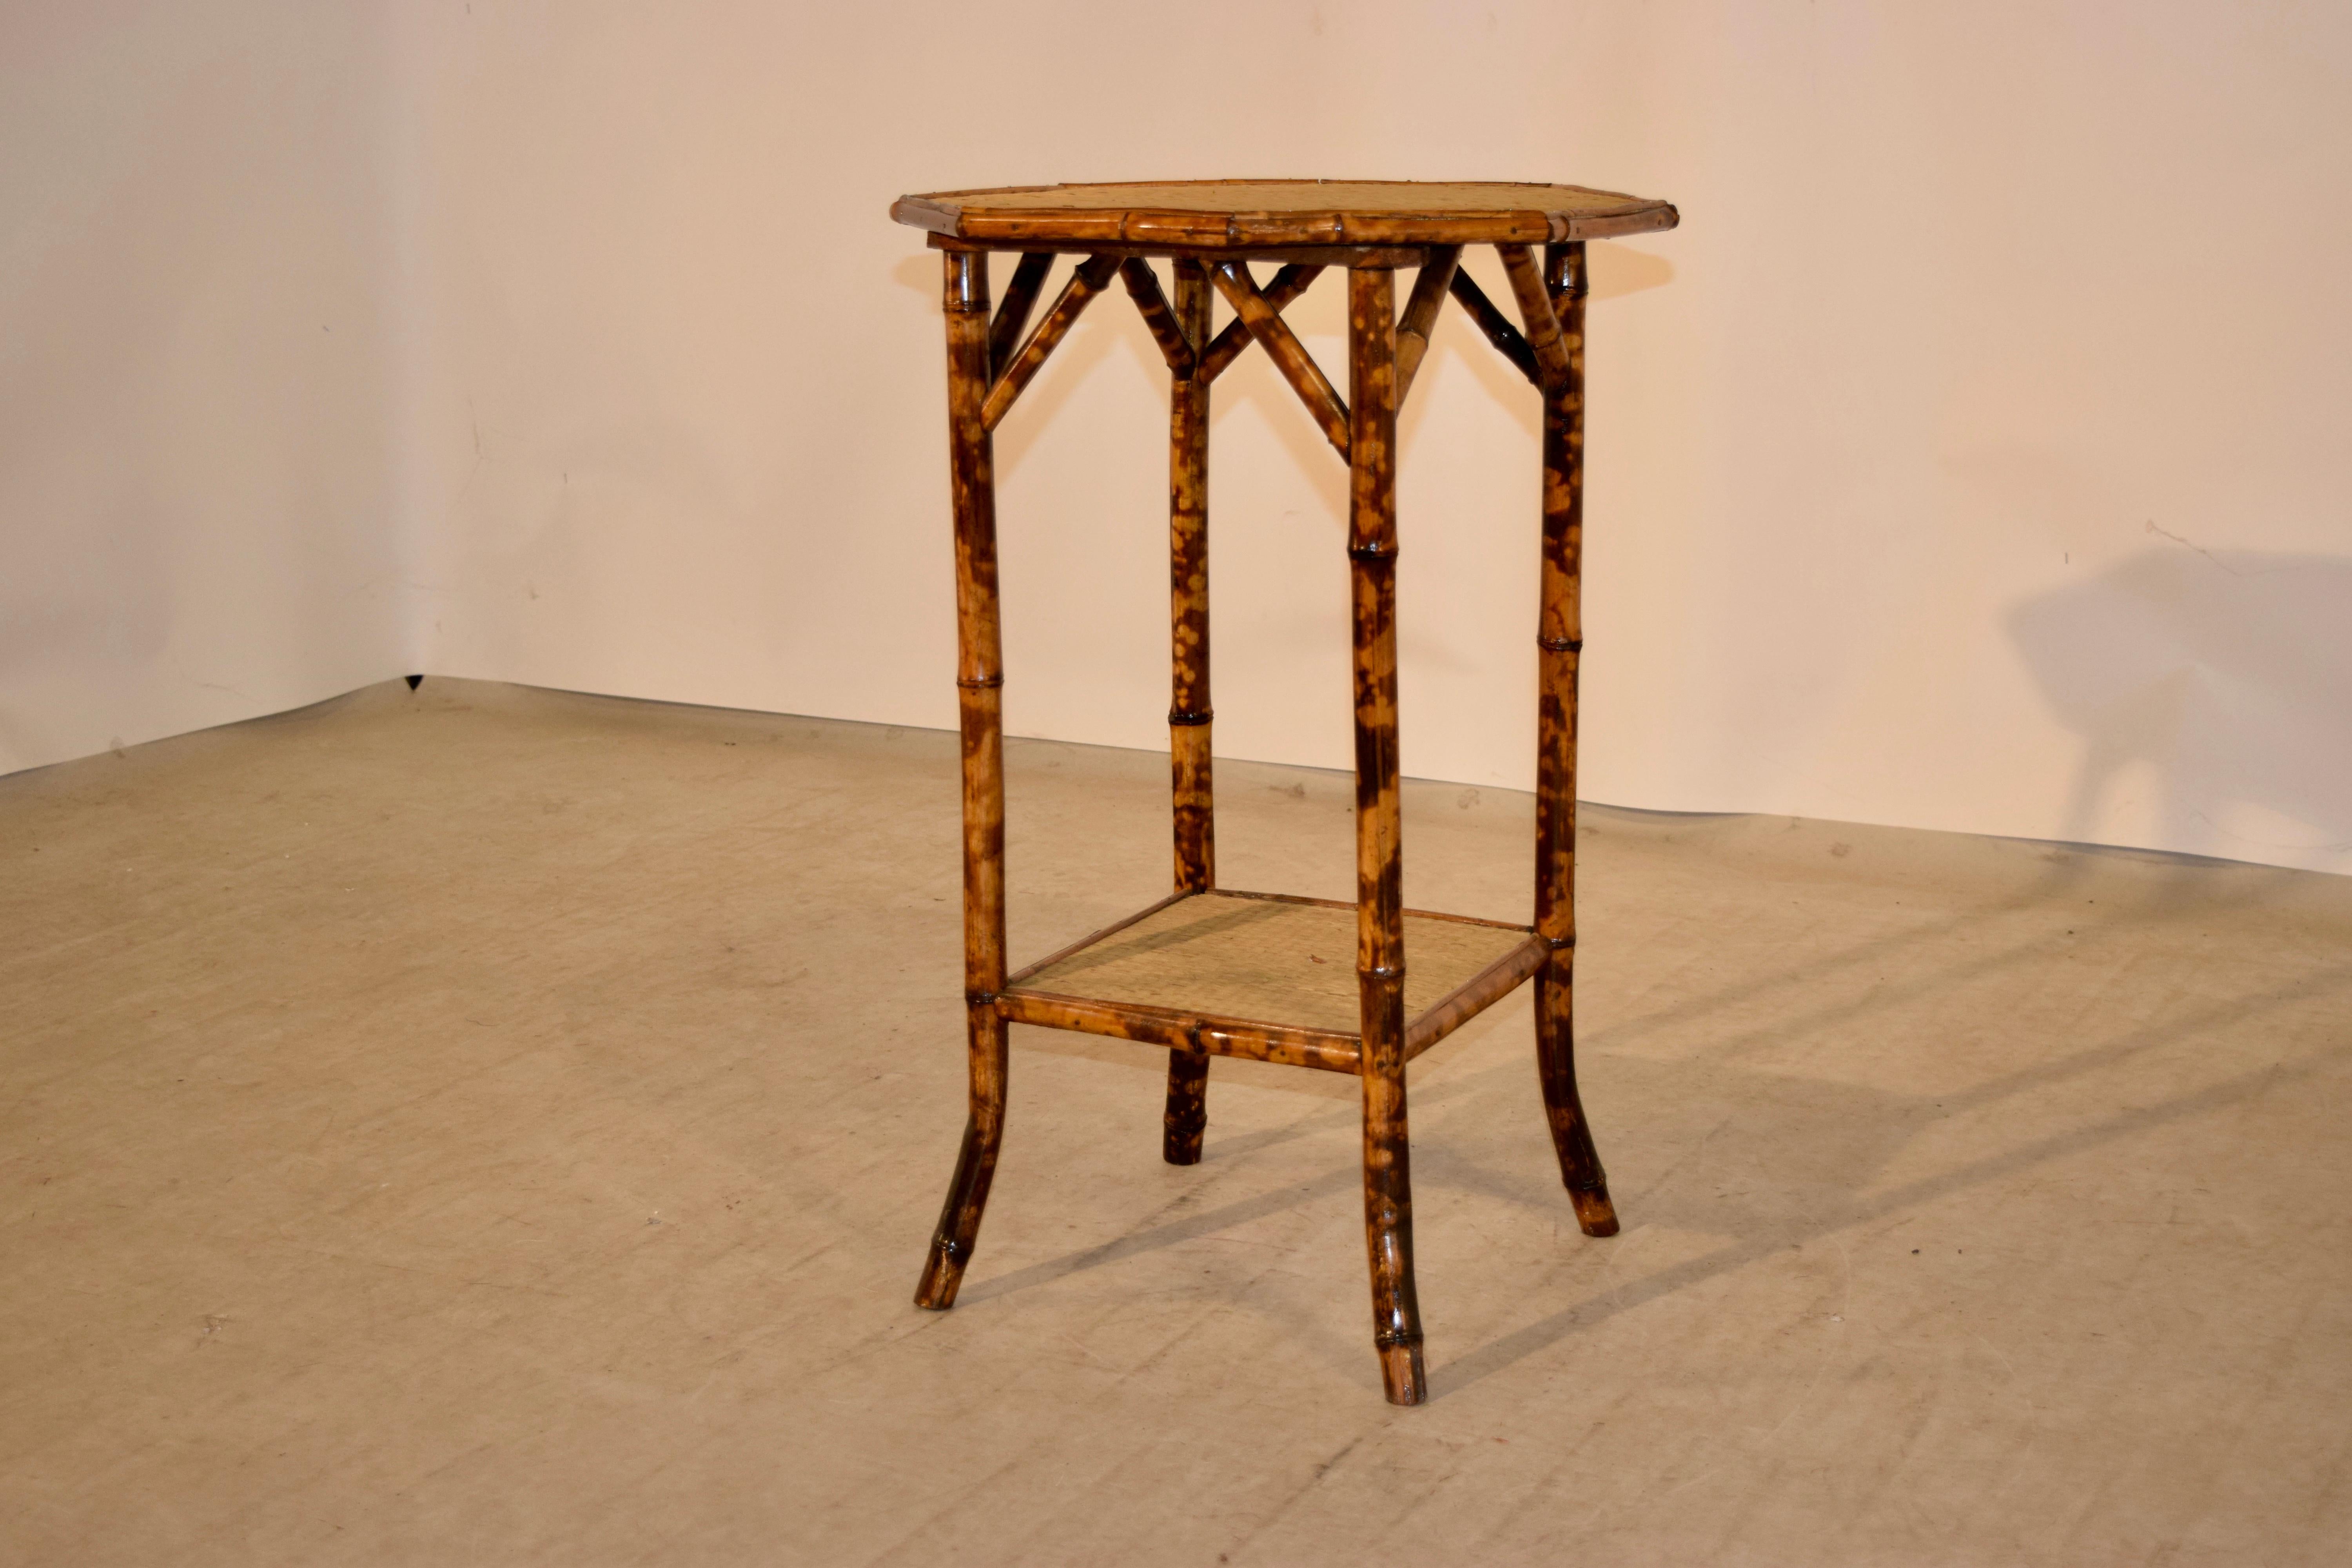 19th century bamboo side table from France with an octagonal shaped top covered in rush, following down to four tortoise bamboo legs, joined at the bottom by a lower shelf, also covered in rush, and splayed feet.